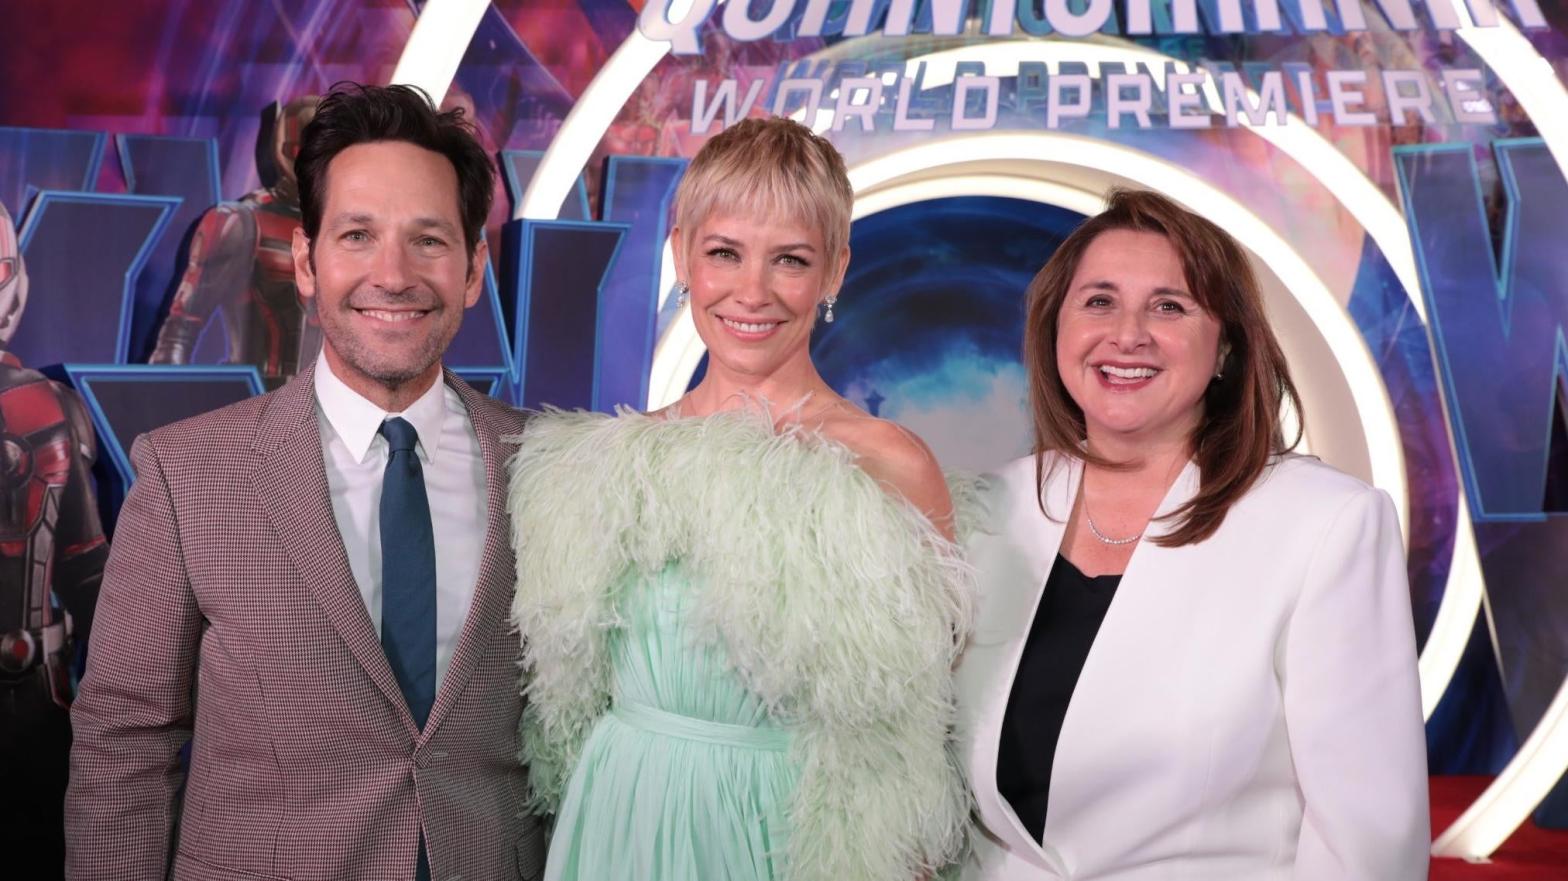 Victoria Alonso, seen here (far right) at the premiere of Ant-Man and the Wasp Quantumania with stars Paul Rudd and Evangeline Lilly, has left Marvel. (Photo: Alex J. Berliner/ABPhotos/Disney)